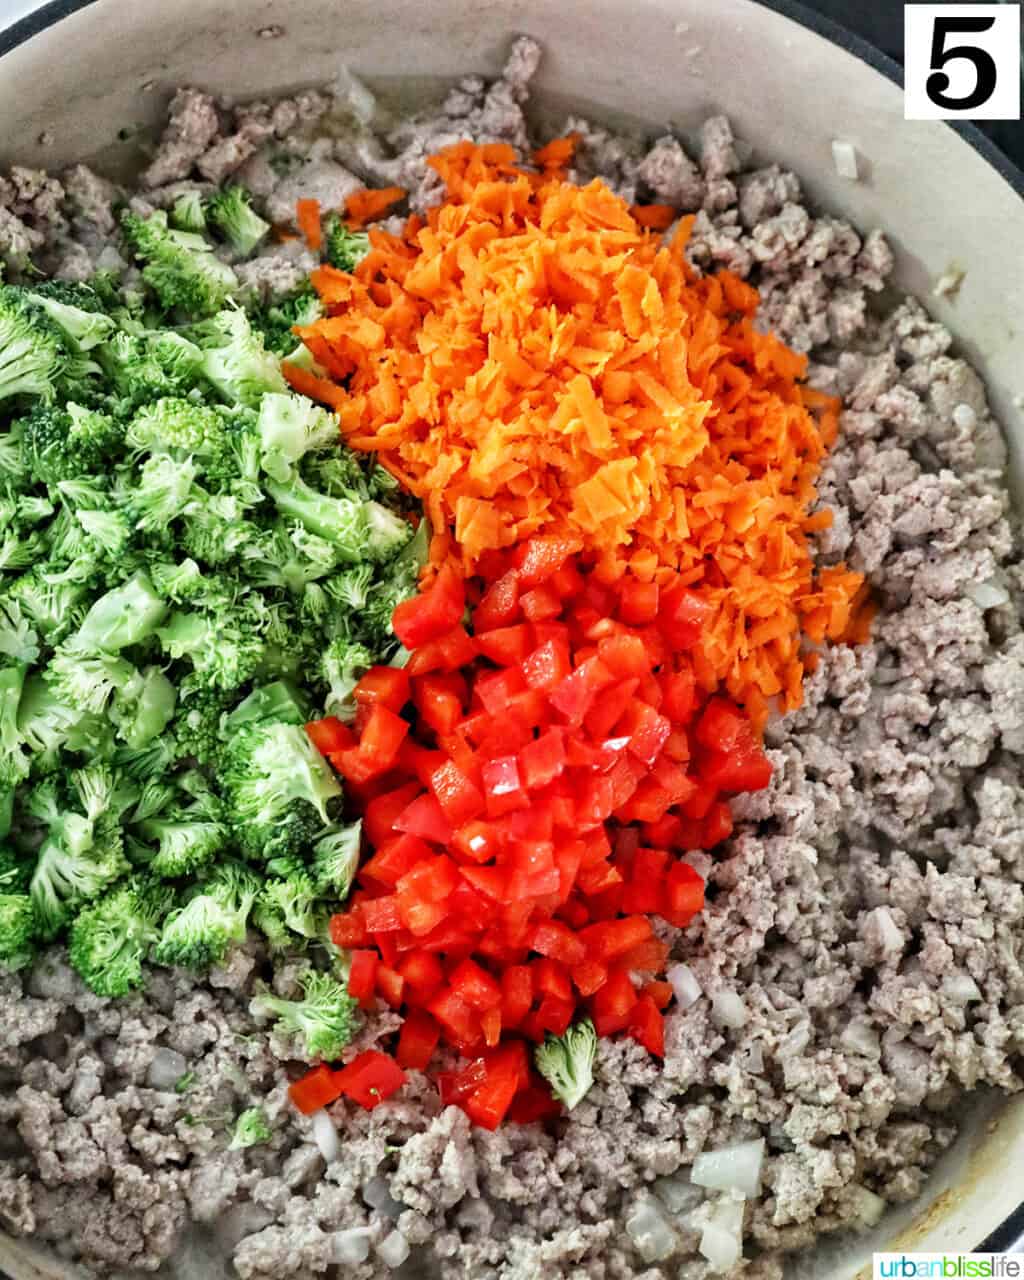 red bell peppers, carrots, and broccoli added to ground turkey cooking in a large skillet.